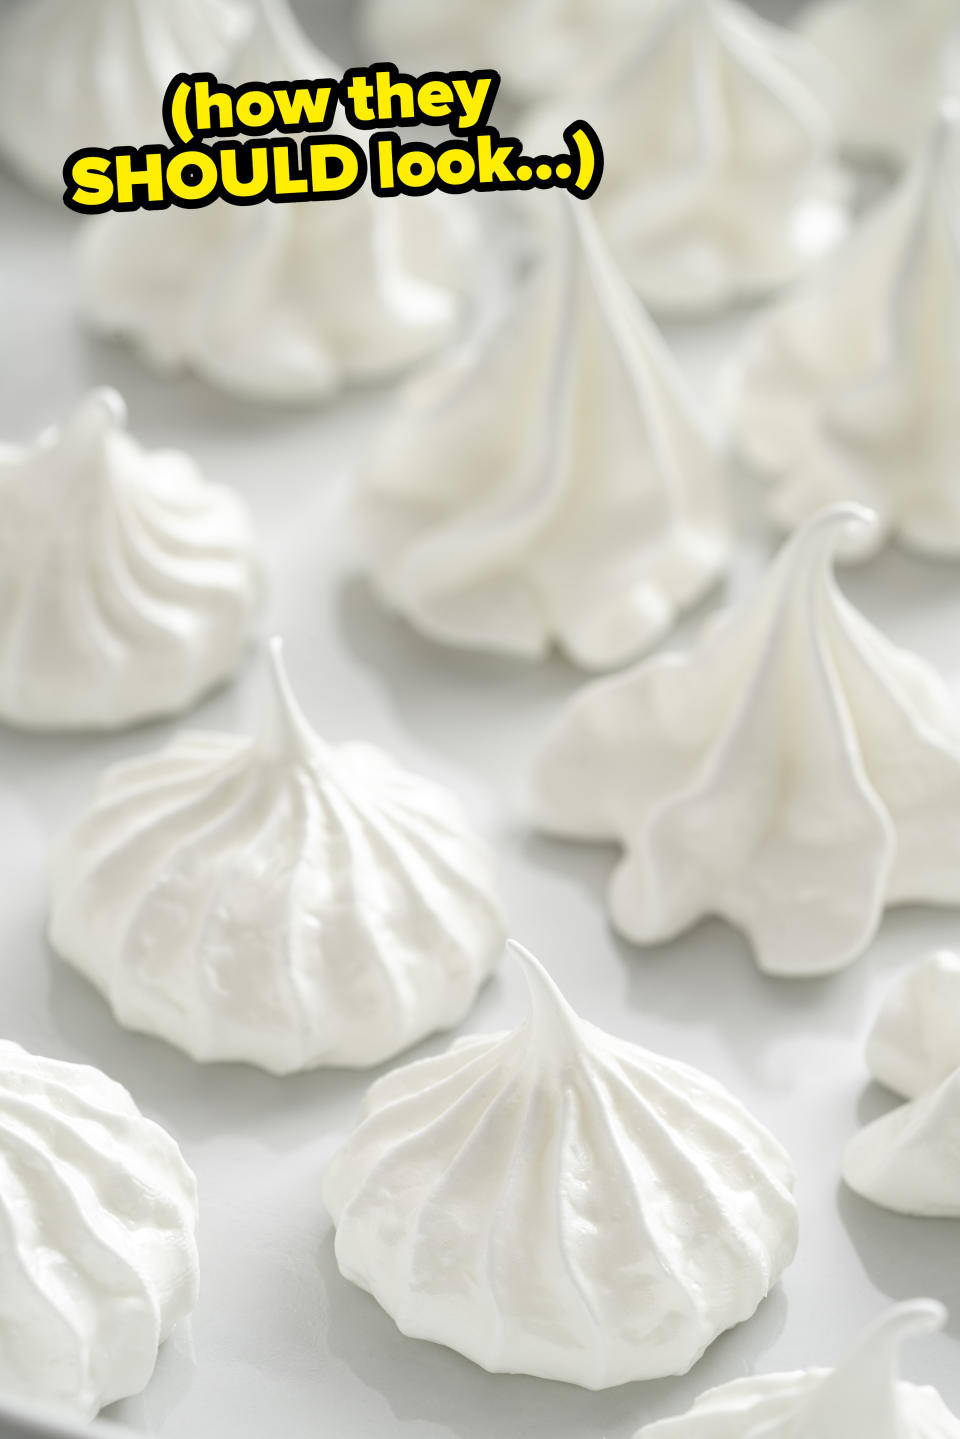 White meringues on a sheet tray with text: "how they SHOULD look"